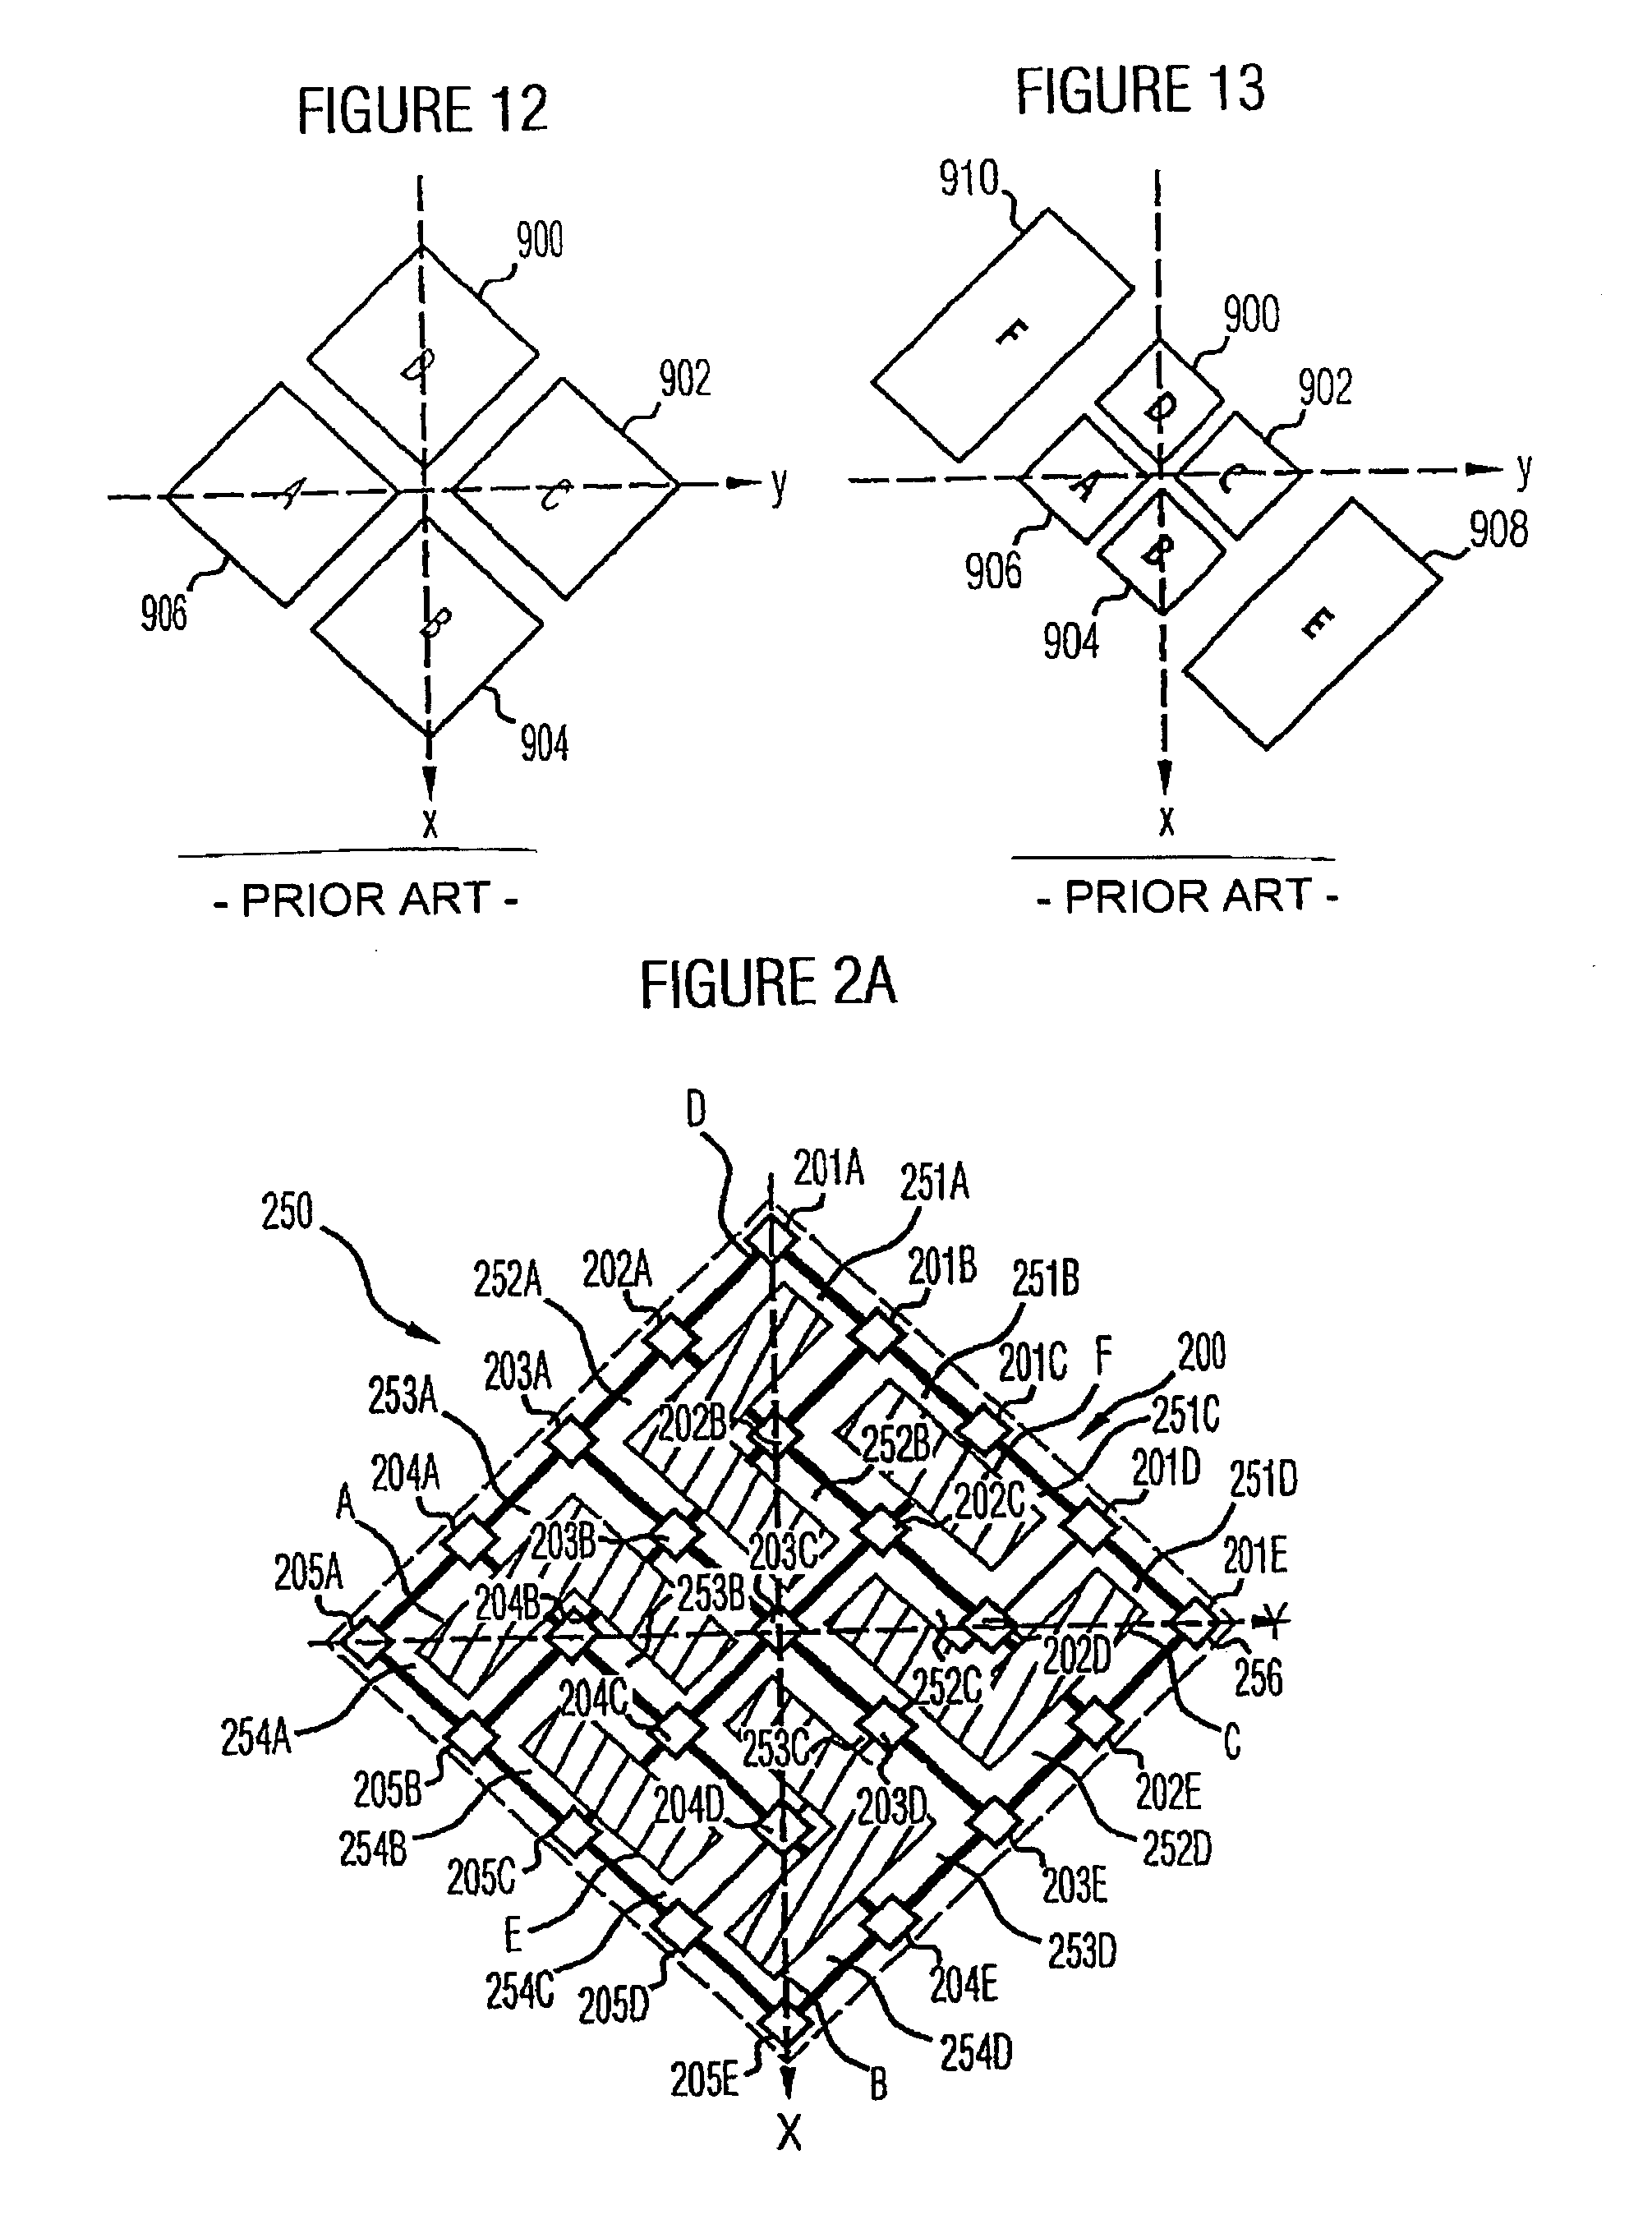 Optical detection device for detecting an intensity of a light beam and for detecting data transmitted by the light beam